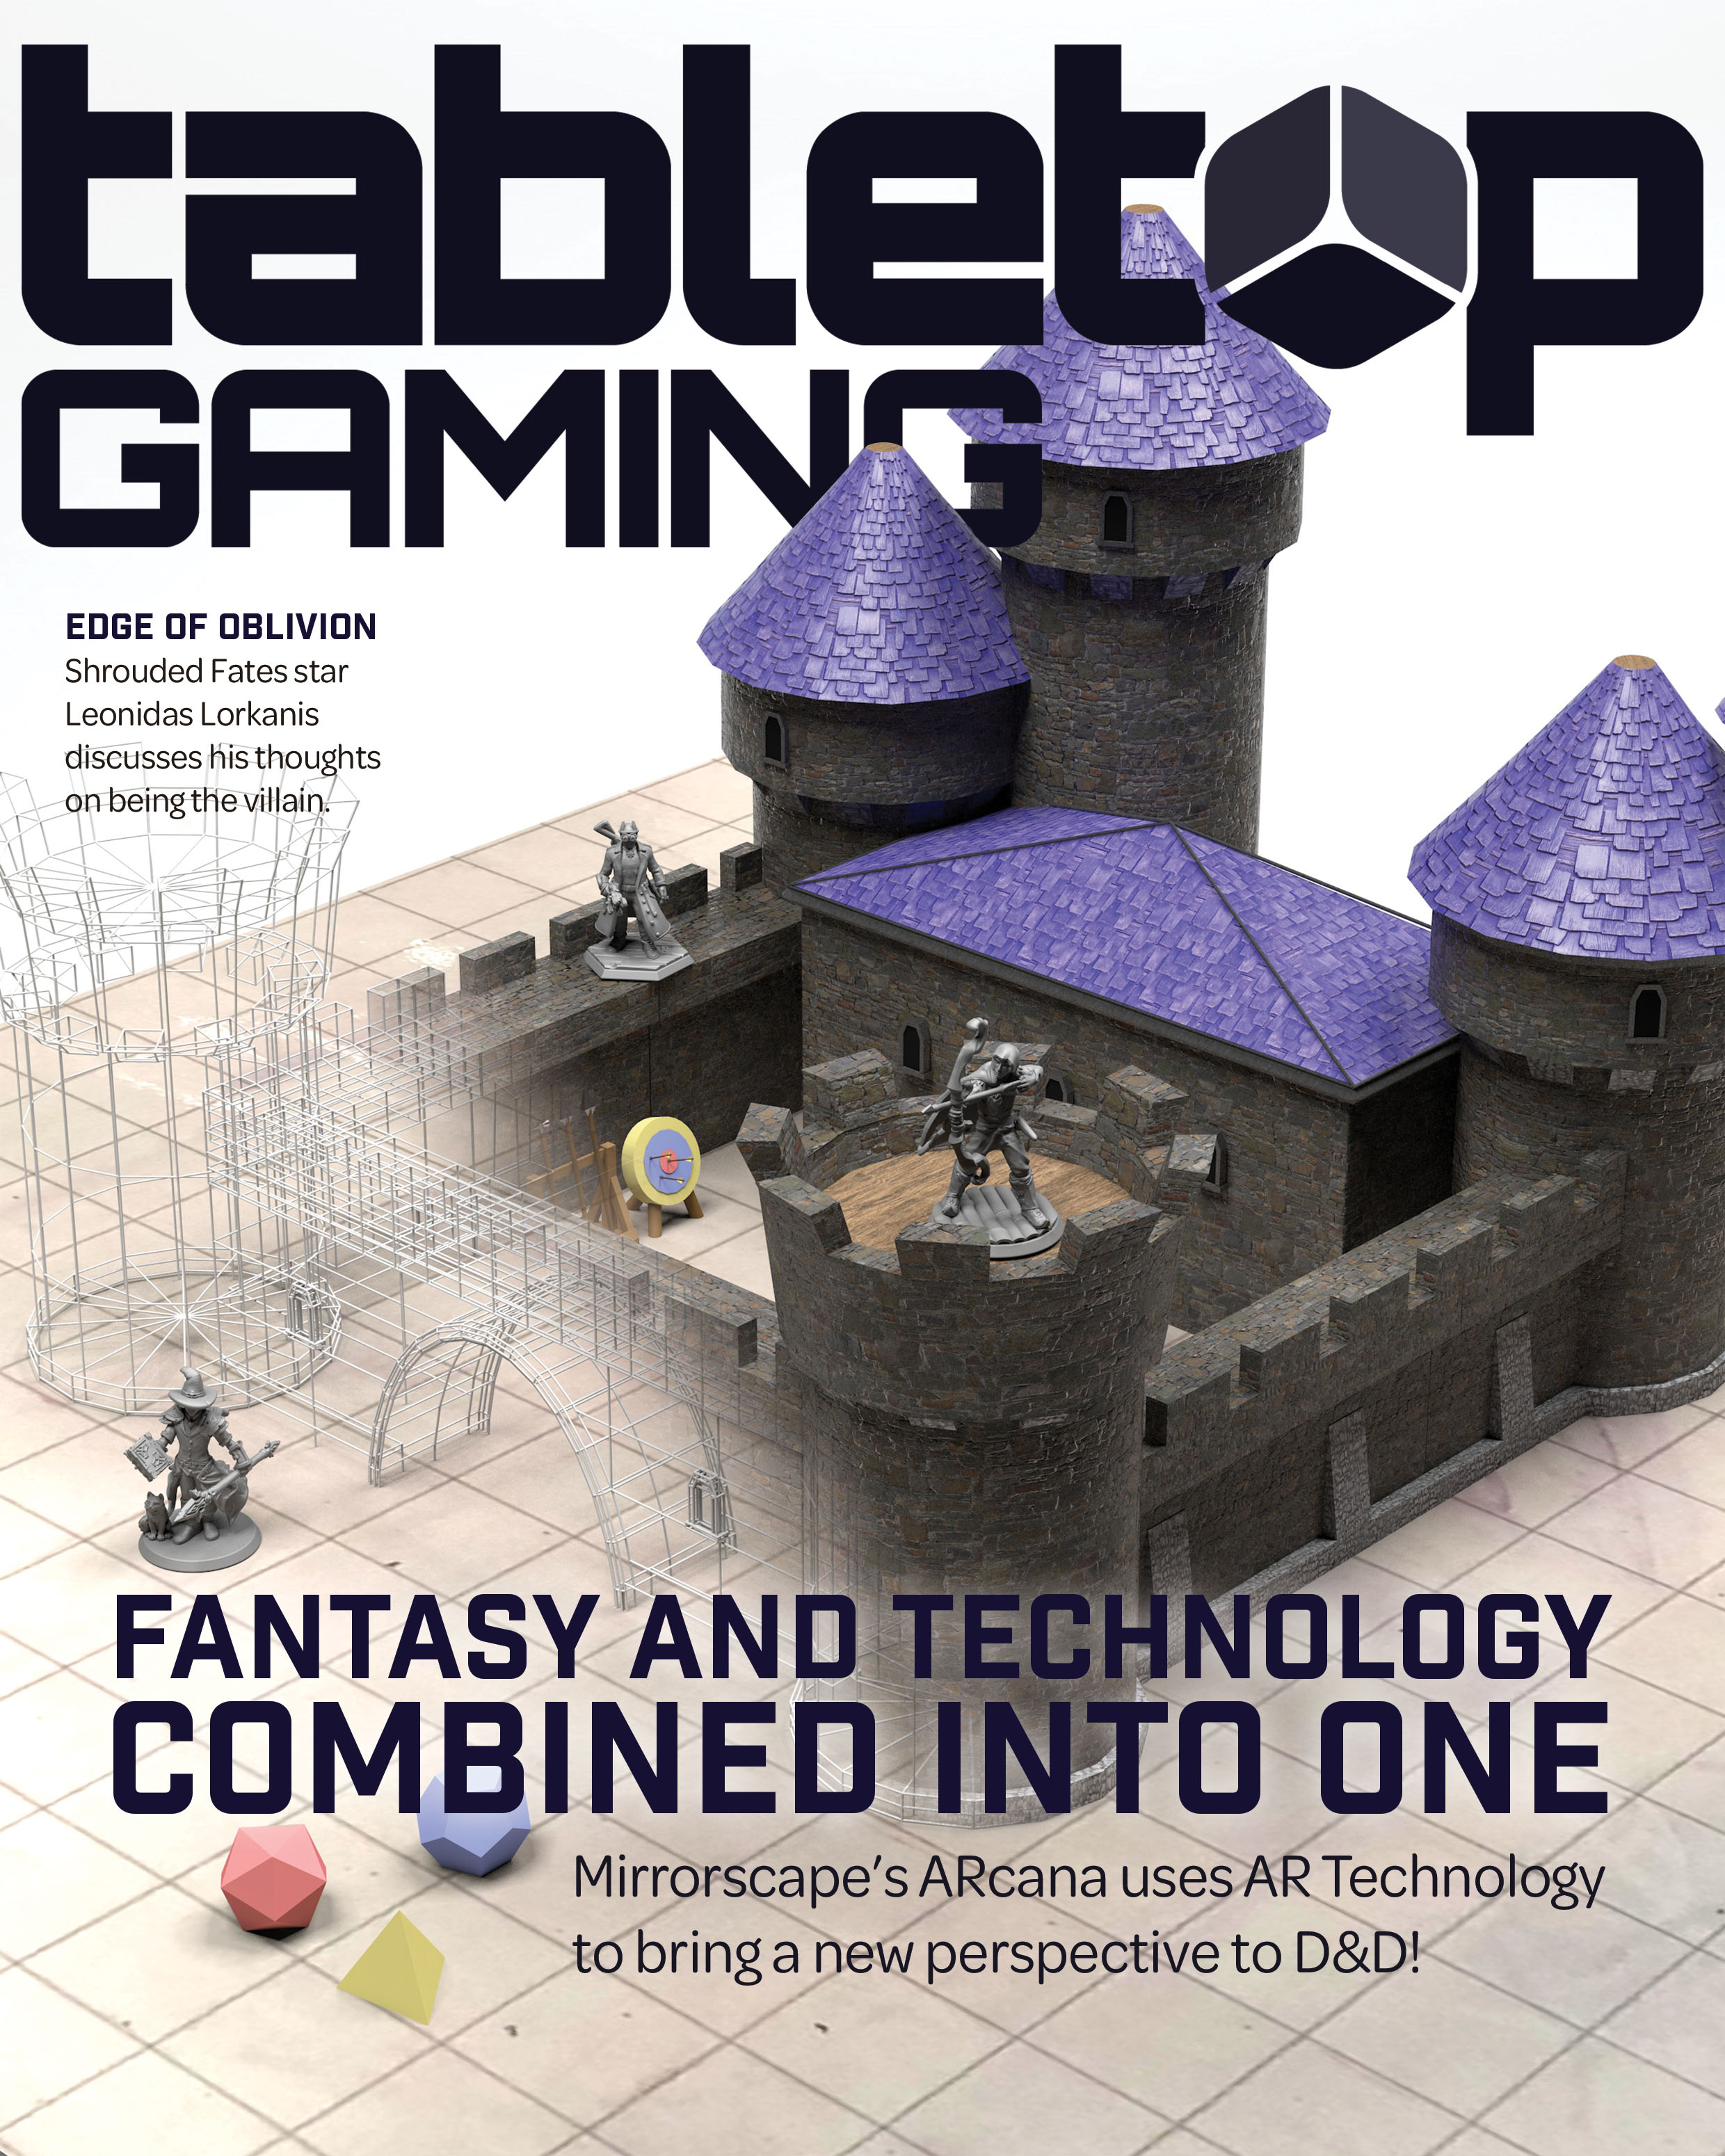 A 3D Magazine Cover designed by Red Crab Design that features a castle transitioning from a wireframe to being fully textured. It reads "Fantasy and Technology combined into one. Mirrorscape's Arcana uses AR technology to bring a new perspective to D&D!"